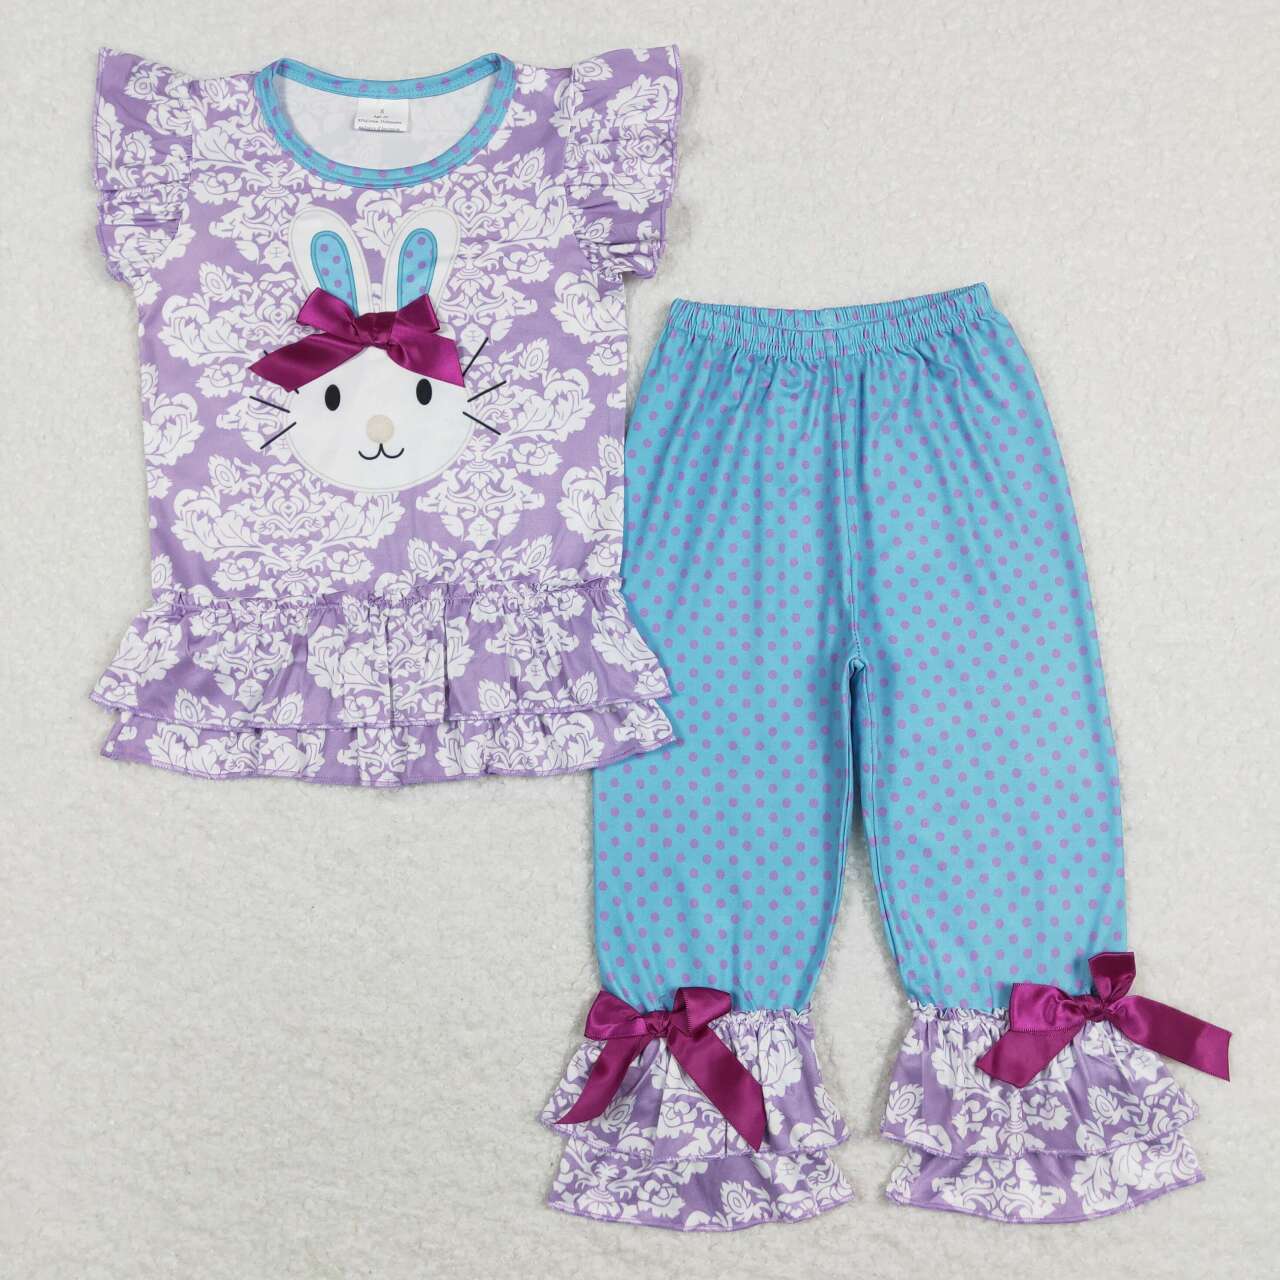 Toddle girls Easter day clothing